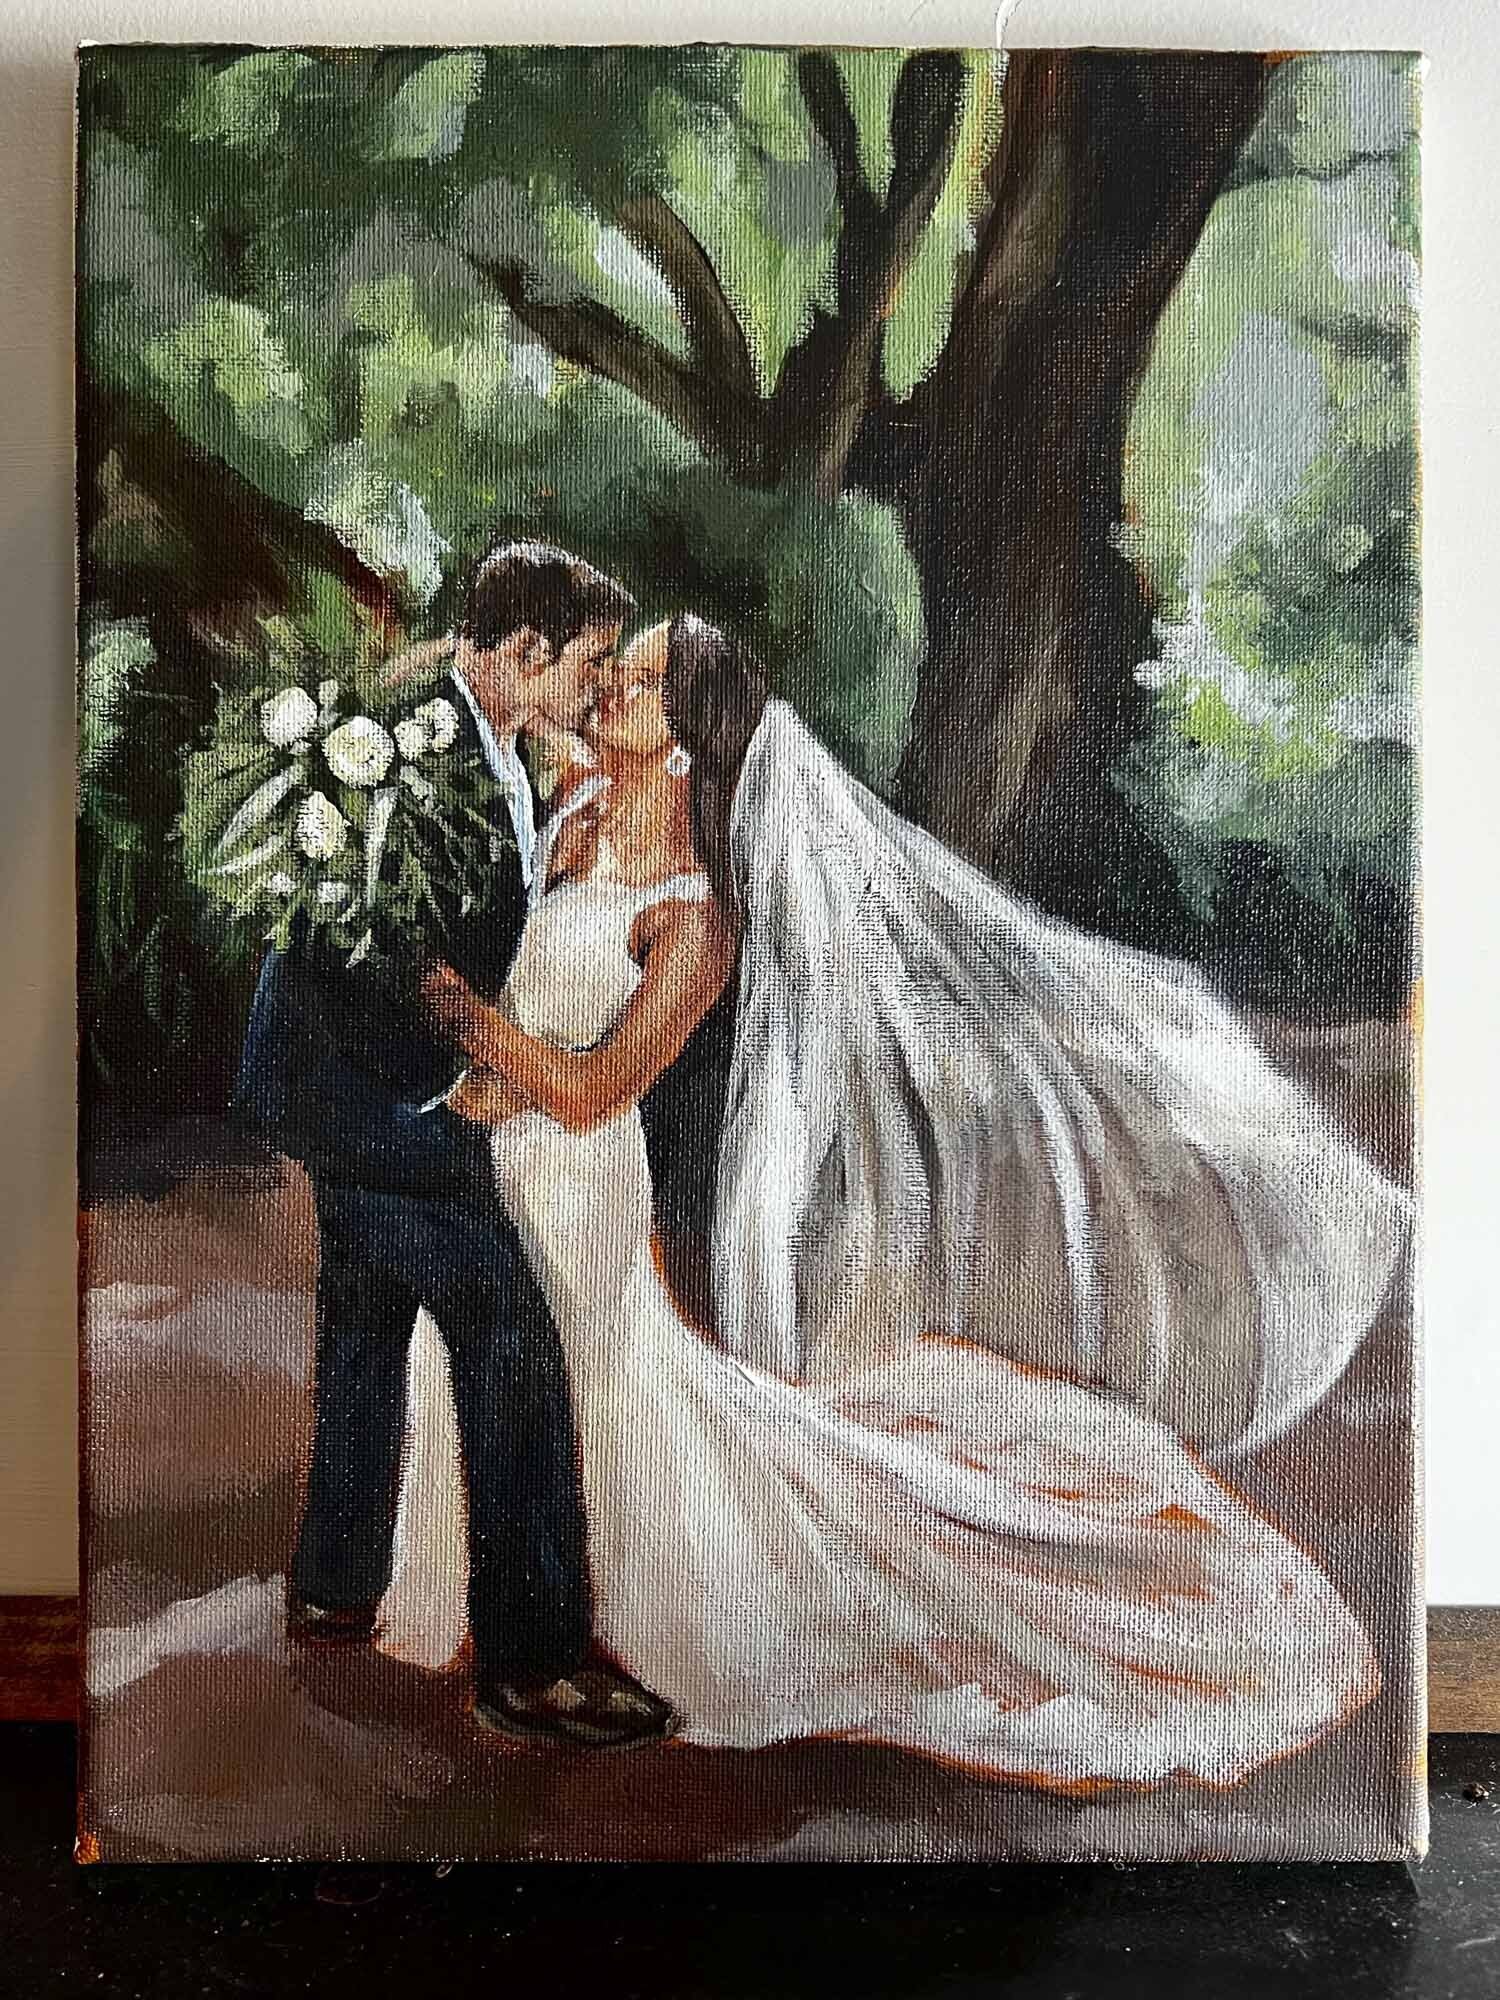 Painting of a bride and groom kissing with veil flowing